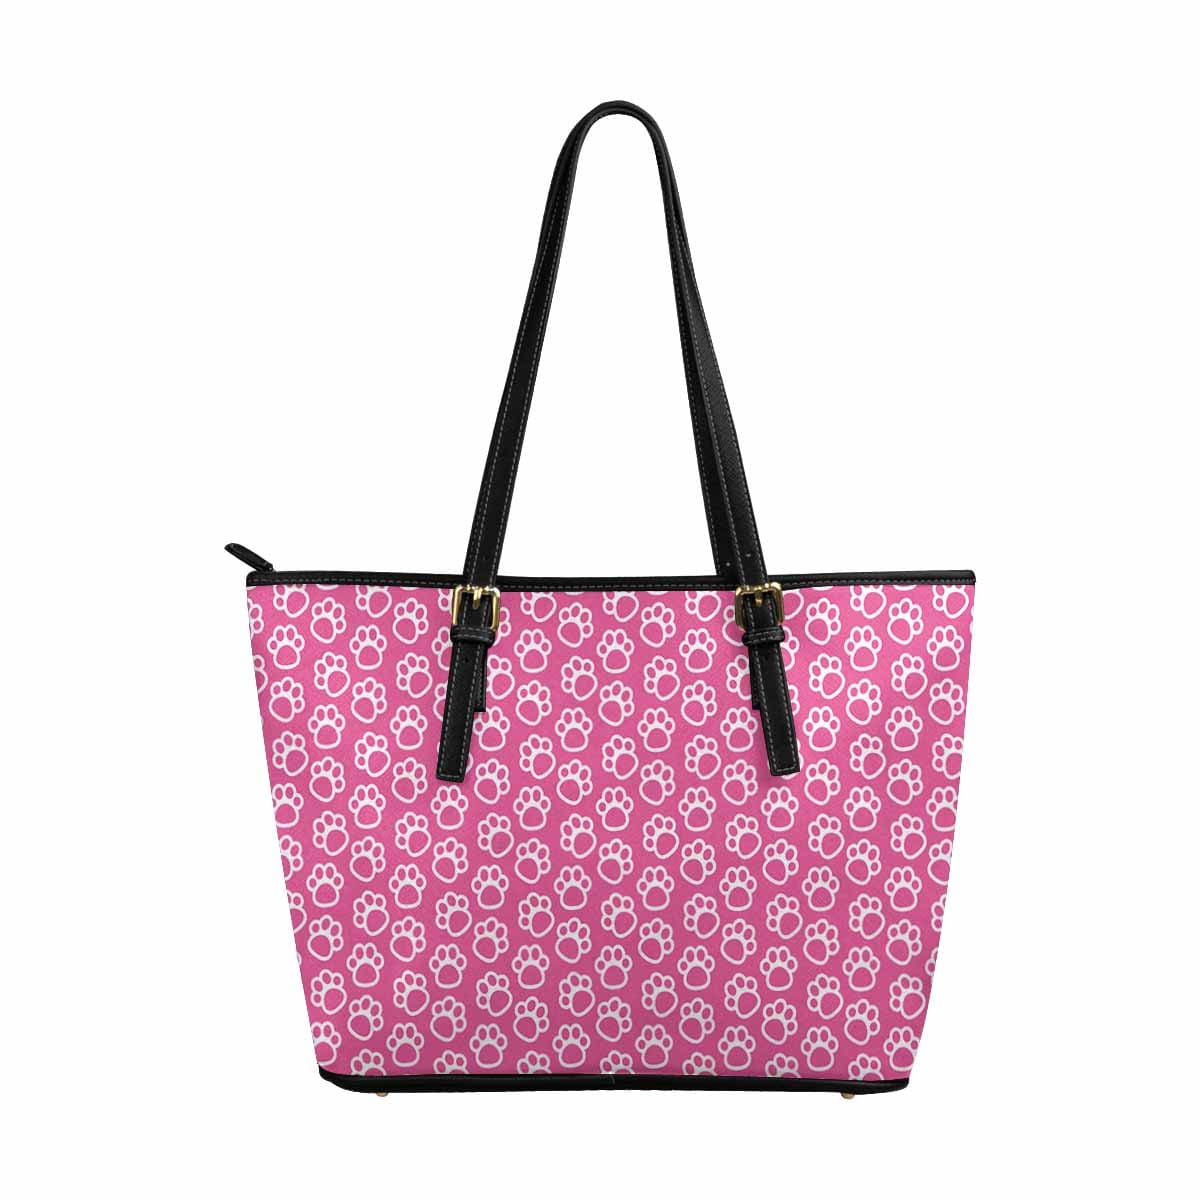 Large Leather Tote Shoulder Bag - Pink Paws Tote - Bags | Leather Tote Bags